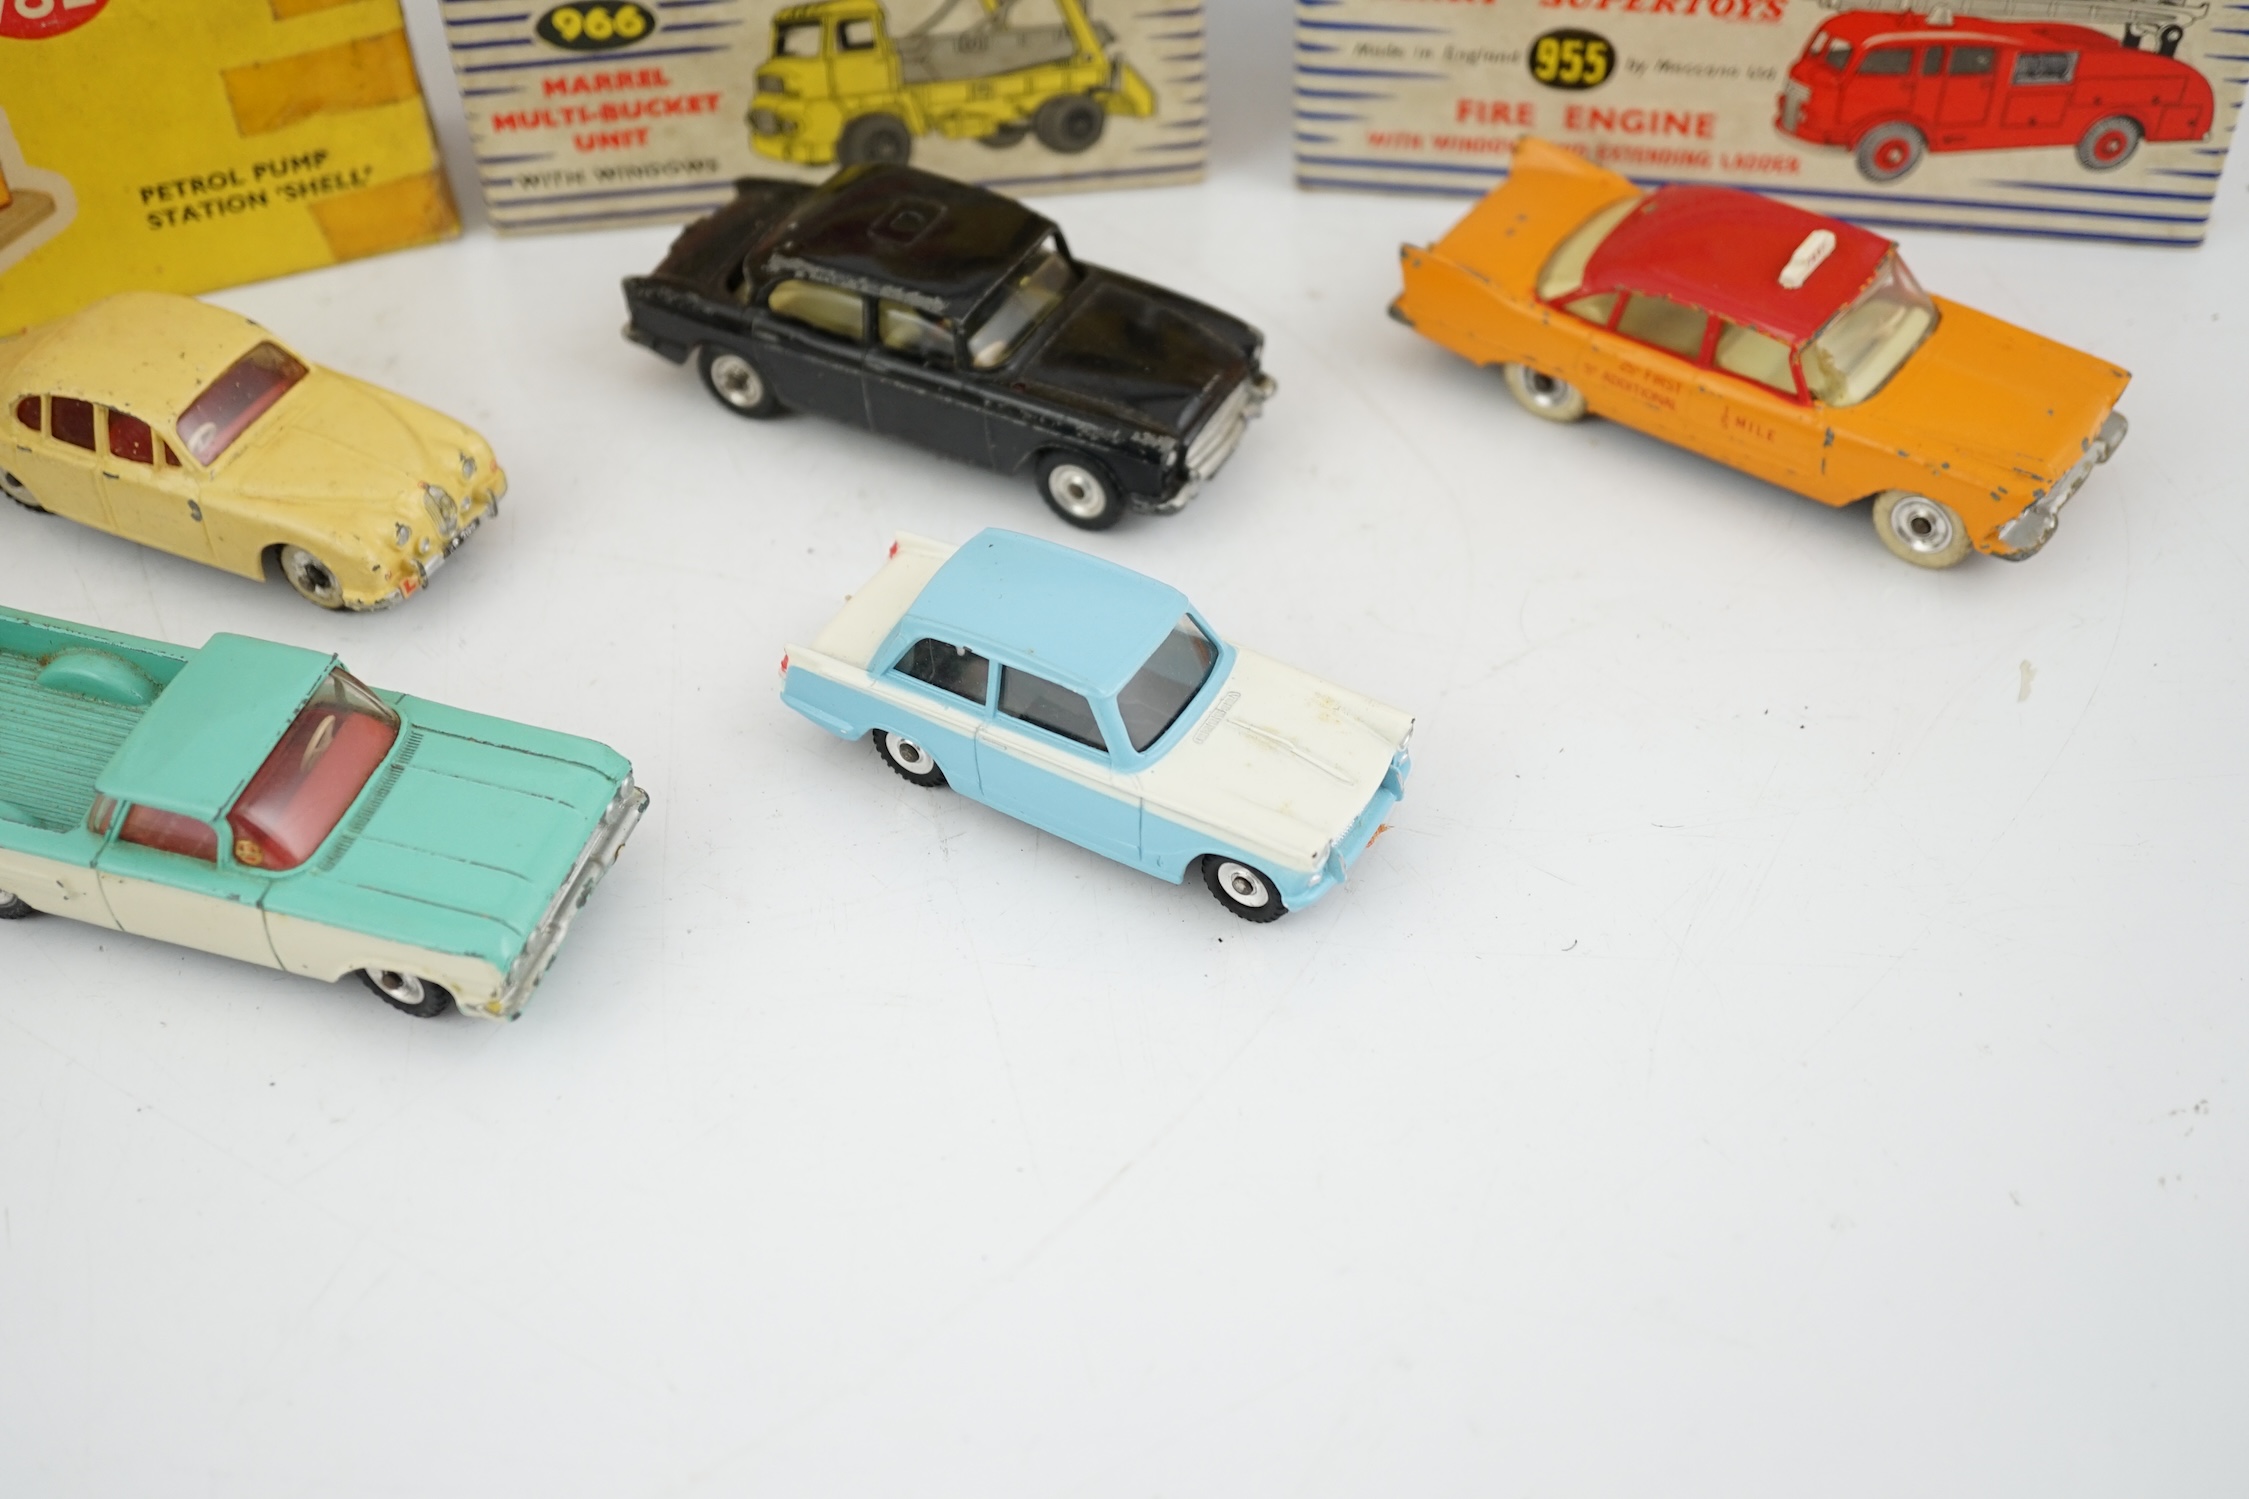 Eleven boxed Dinky Toys